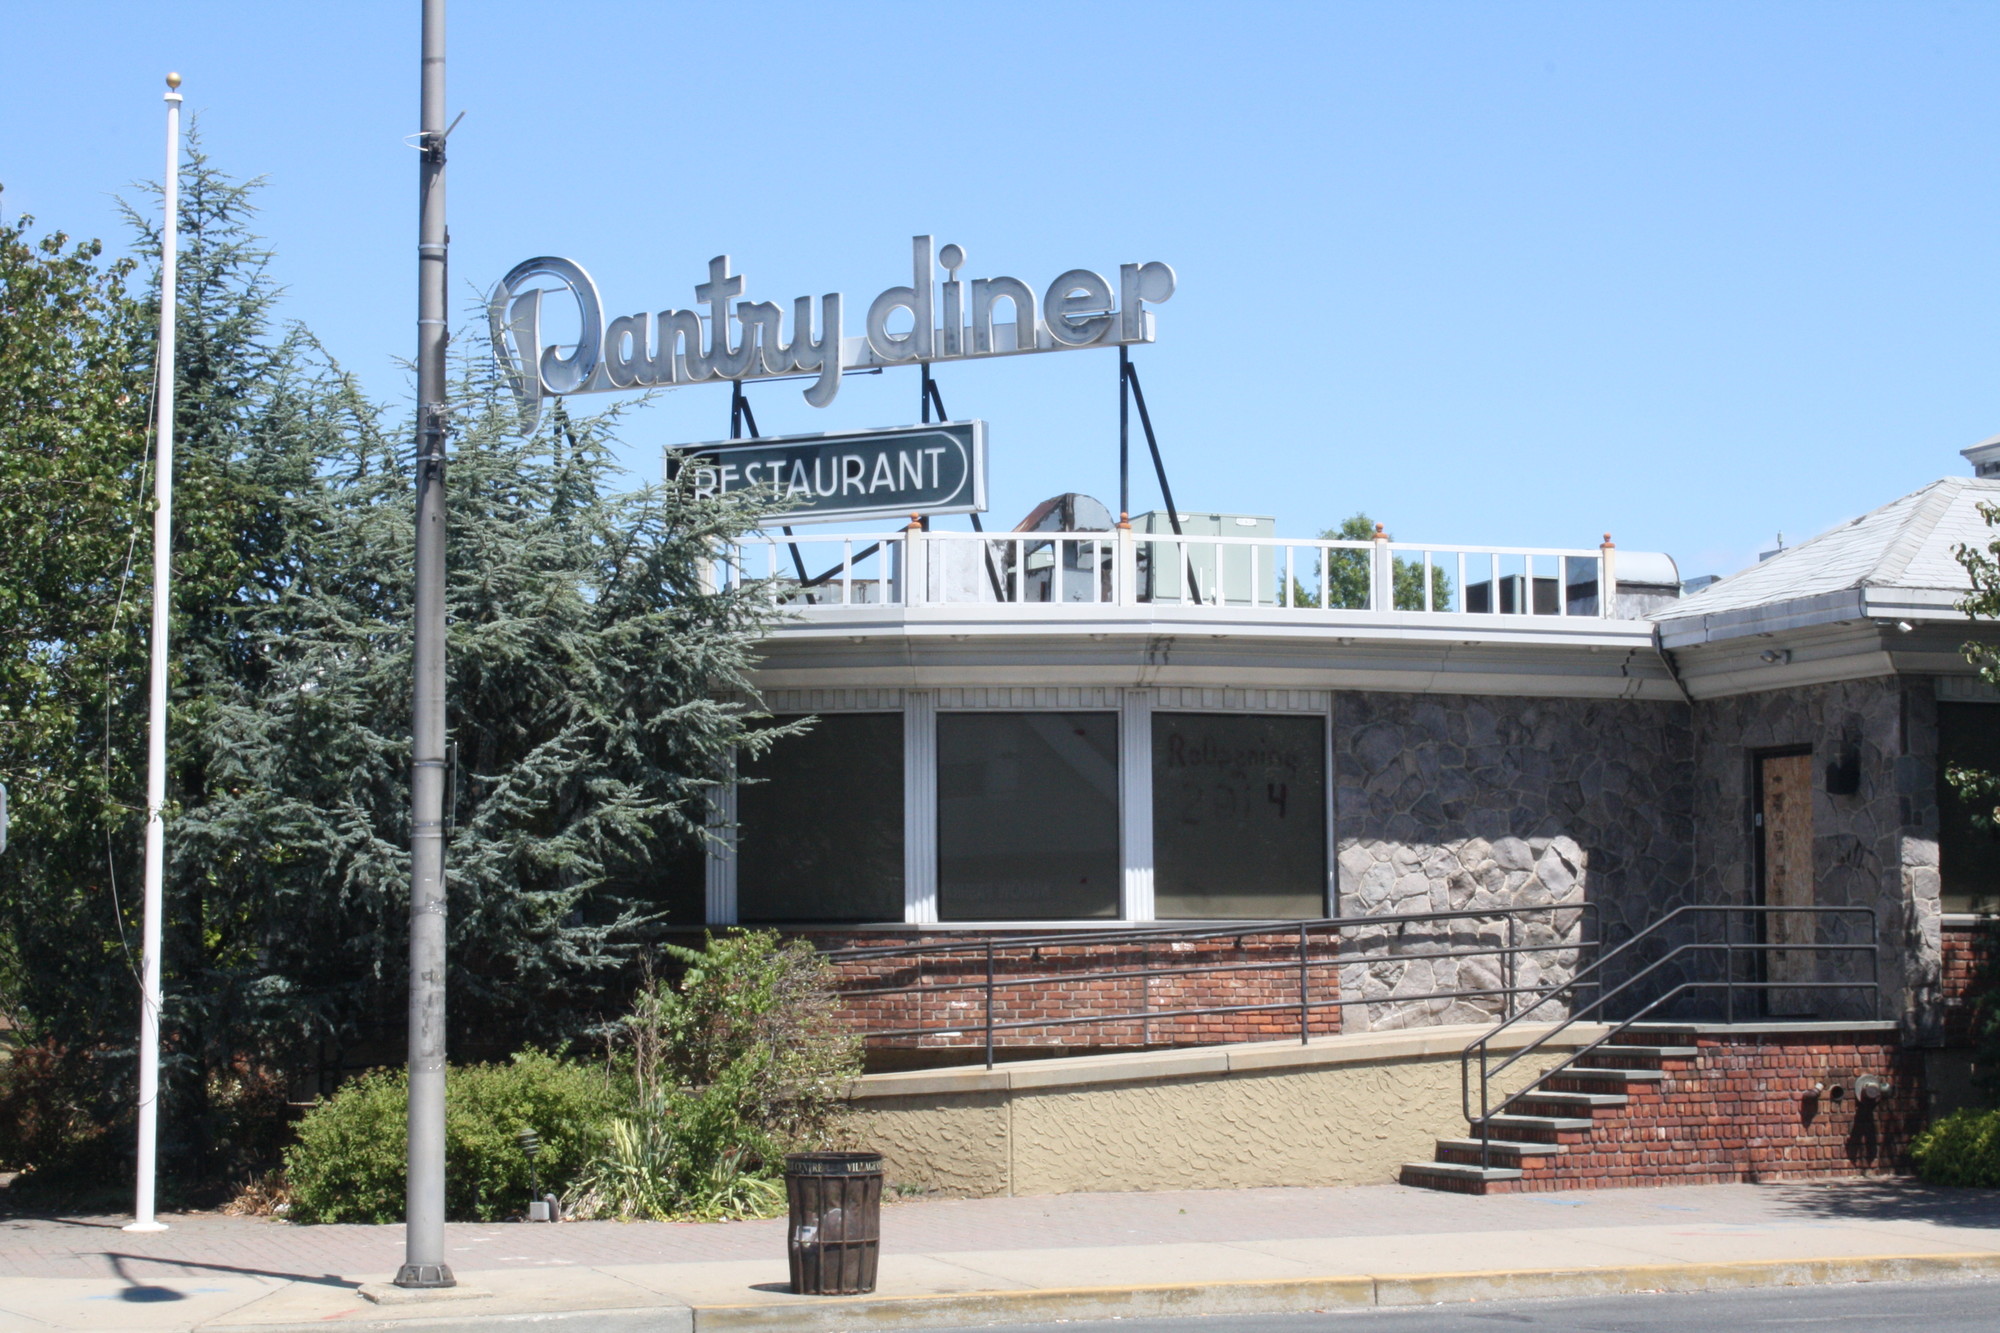 The Pantry Diner is working on reopening. The owners are planning on redoing the facade in brick and keeping the interior the same. (Alex Costello/Herald)